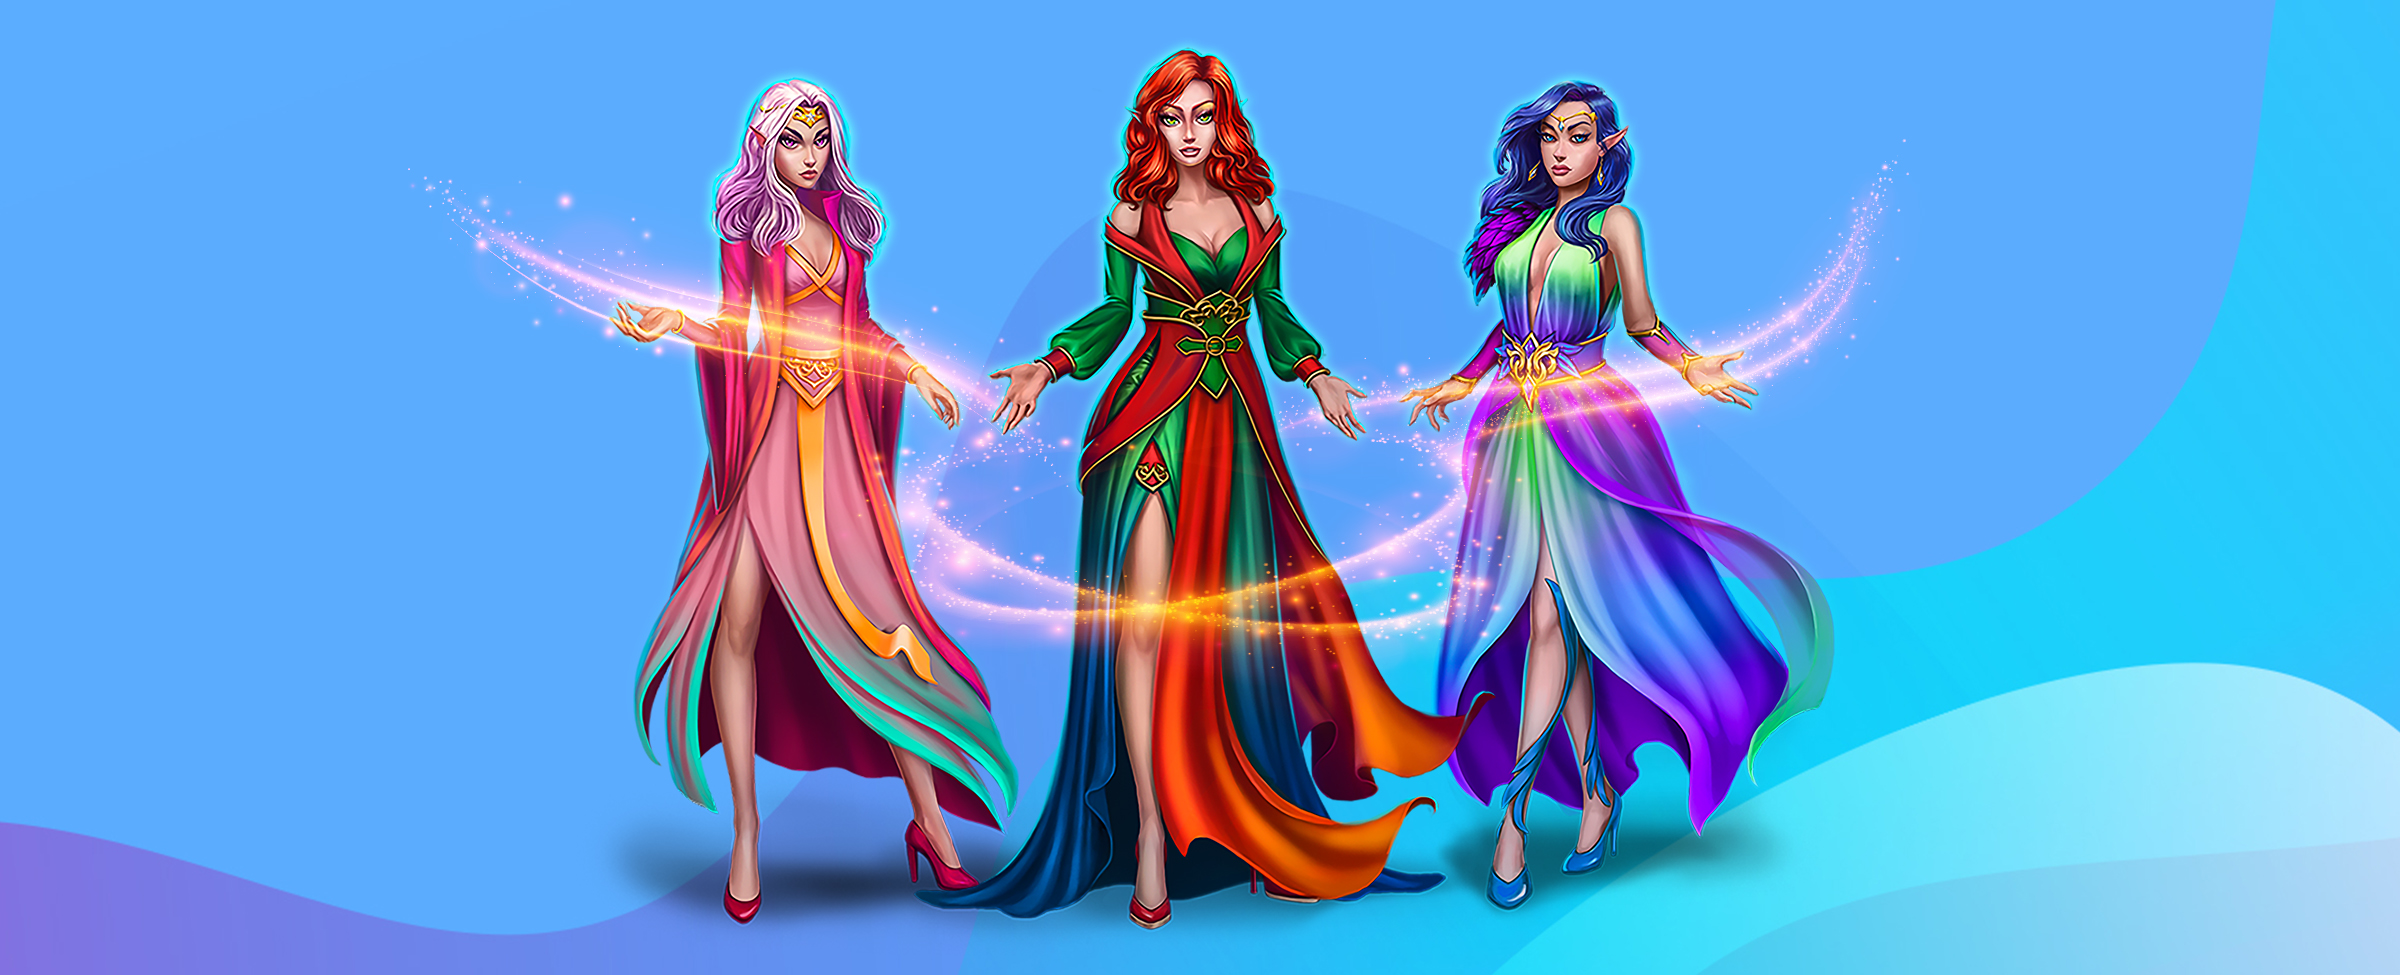 Three 3D-animated fairies from the SlotsLV slots game, Fairy Wins, are dancing in flowing bright dresses. Circling around them are wisps of magic as they hold their hands outstretched. Behind them, we see a multi-tone blue abstract background.